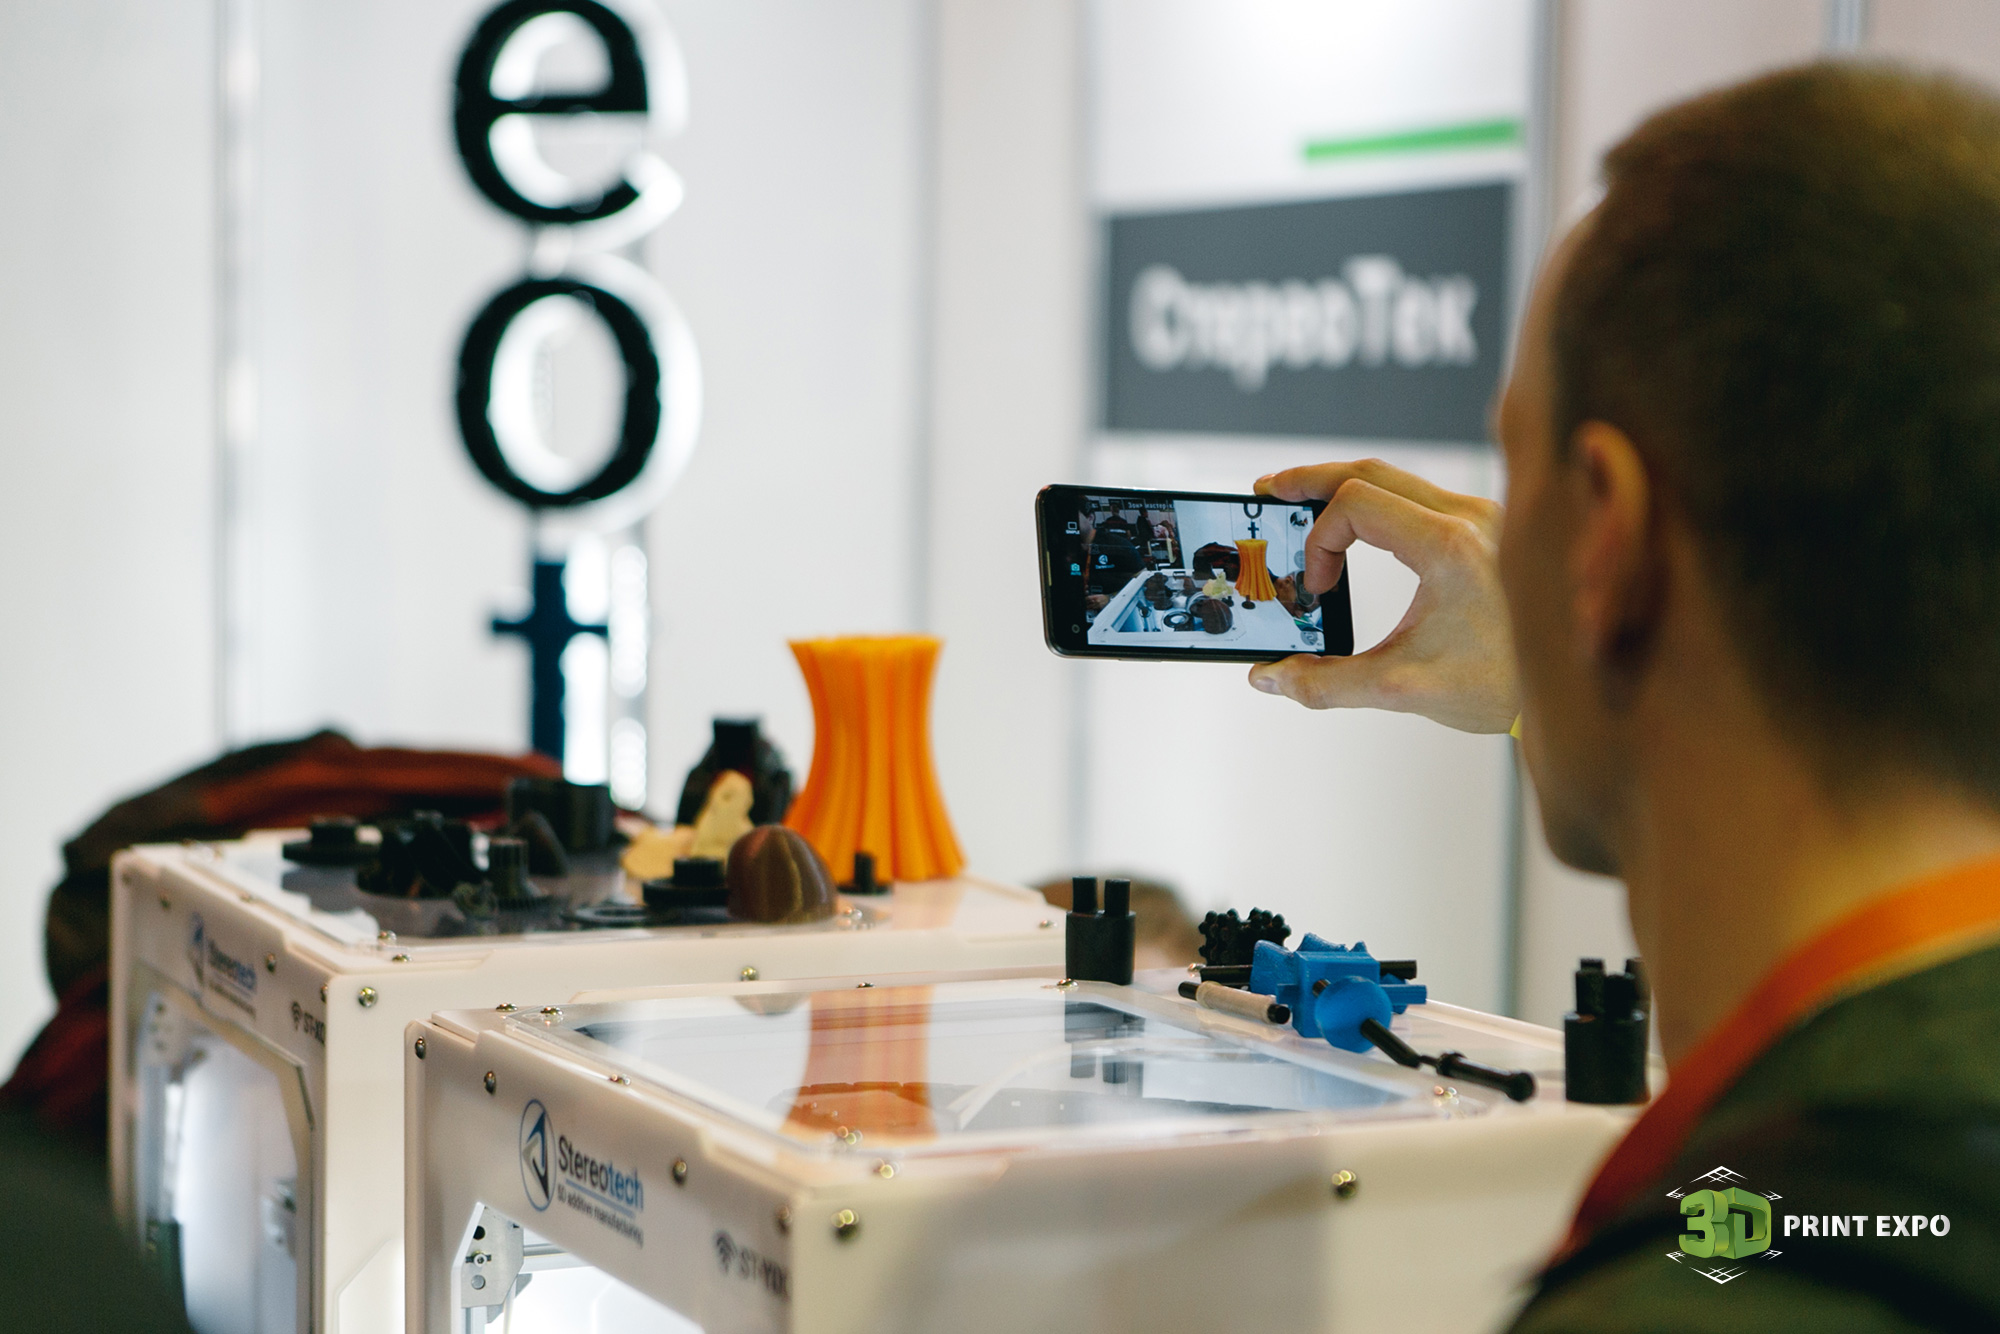 3D Print Expo: Results of 3D Print Expo 2019 - 4